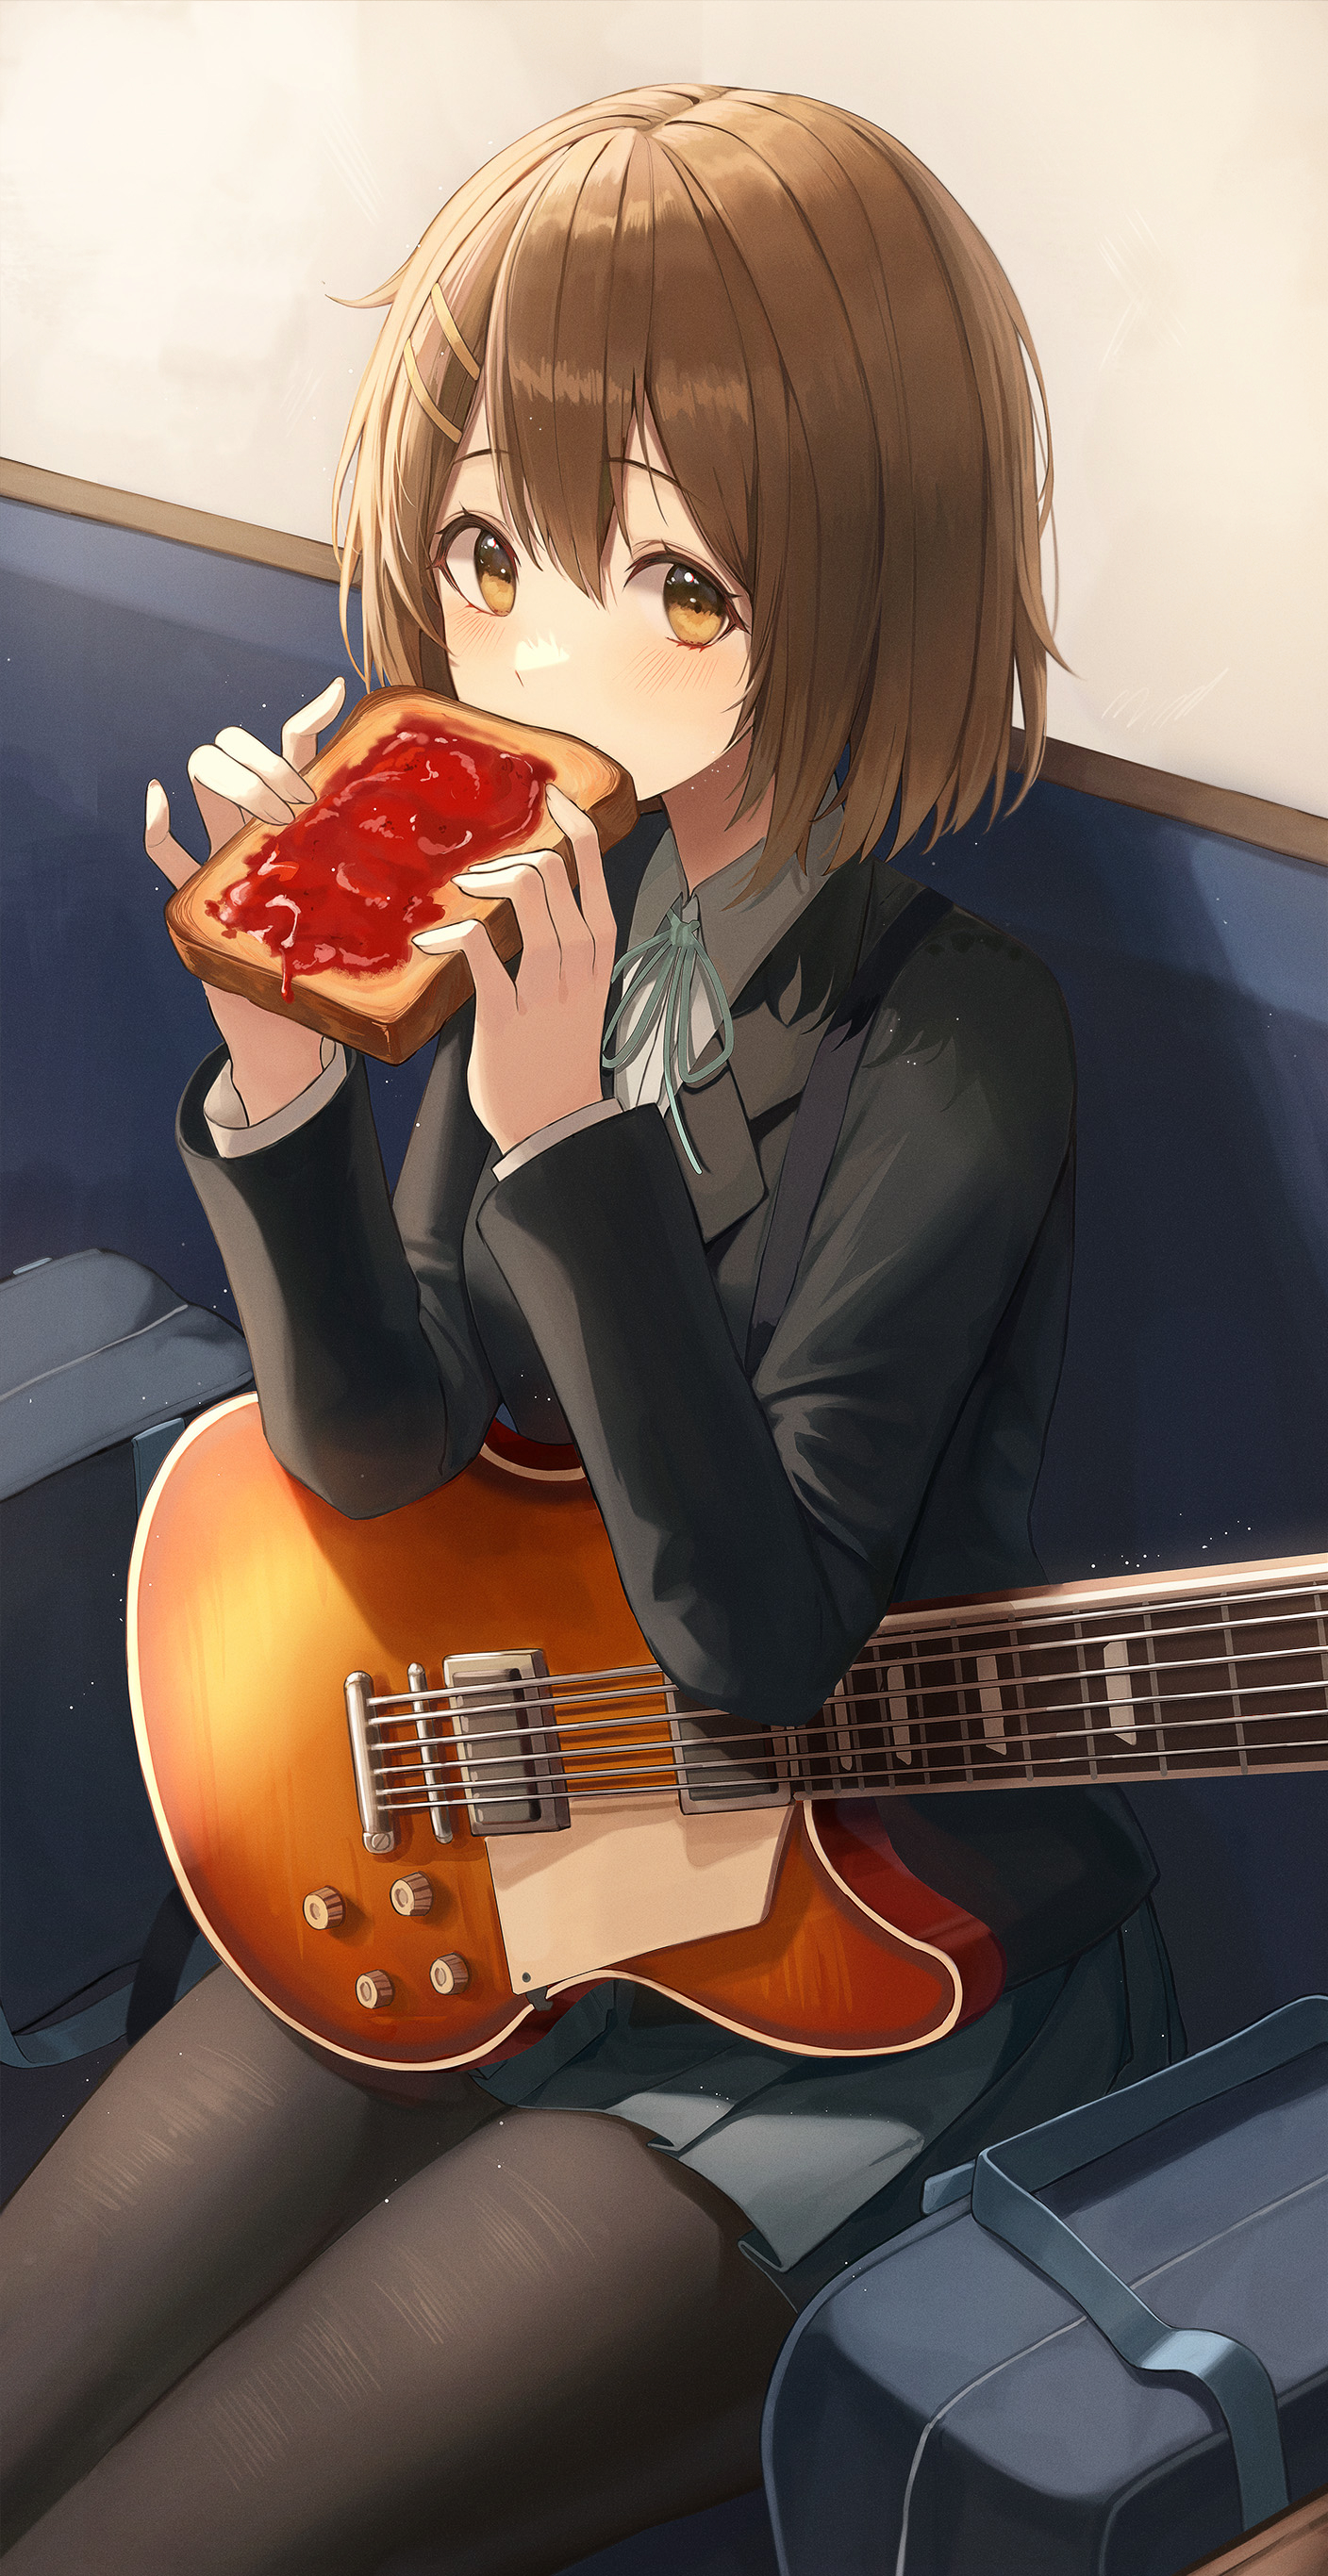 Looking At Viewer K ON Toast Guitar Musical Instrument Anime Anime Girls Brunette Brown Eyes Hirasaw 1408x2732